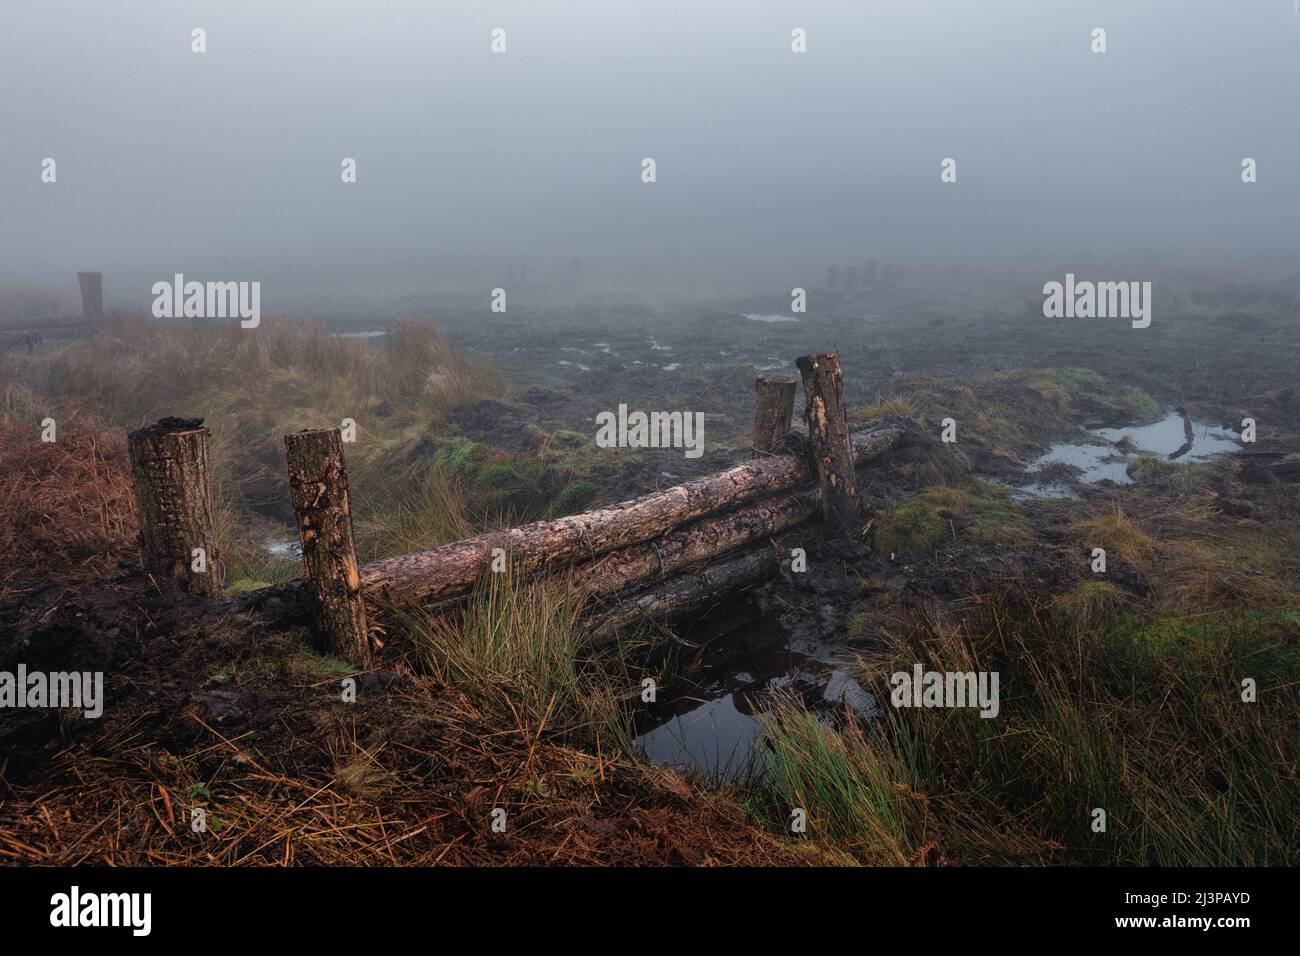 Barriers installed to block the drainage ditches on Ilkley Moor to regenerate the peat bogs and sphagnum moss, West Yorkshire, England, UK Stock Photo